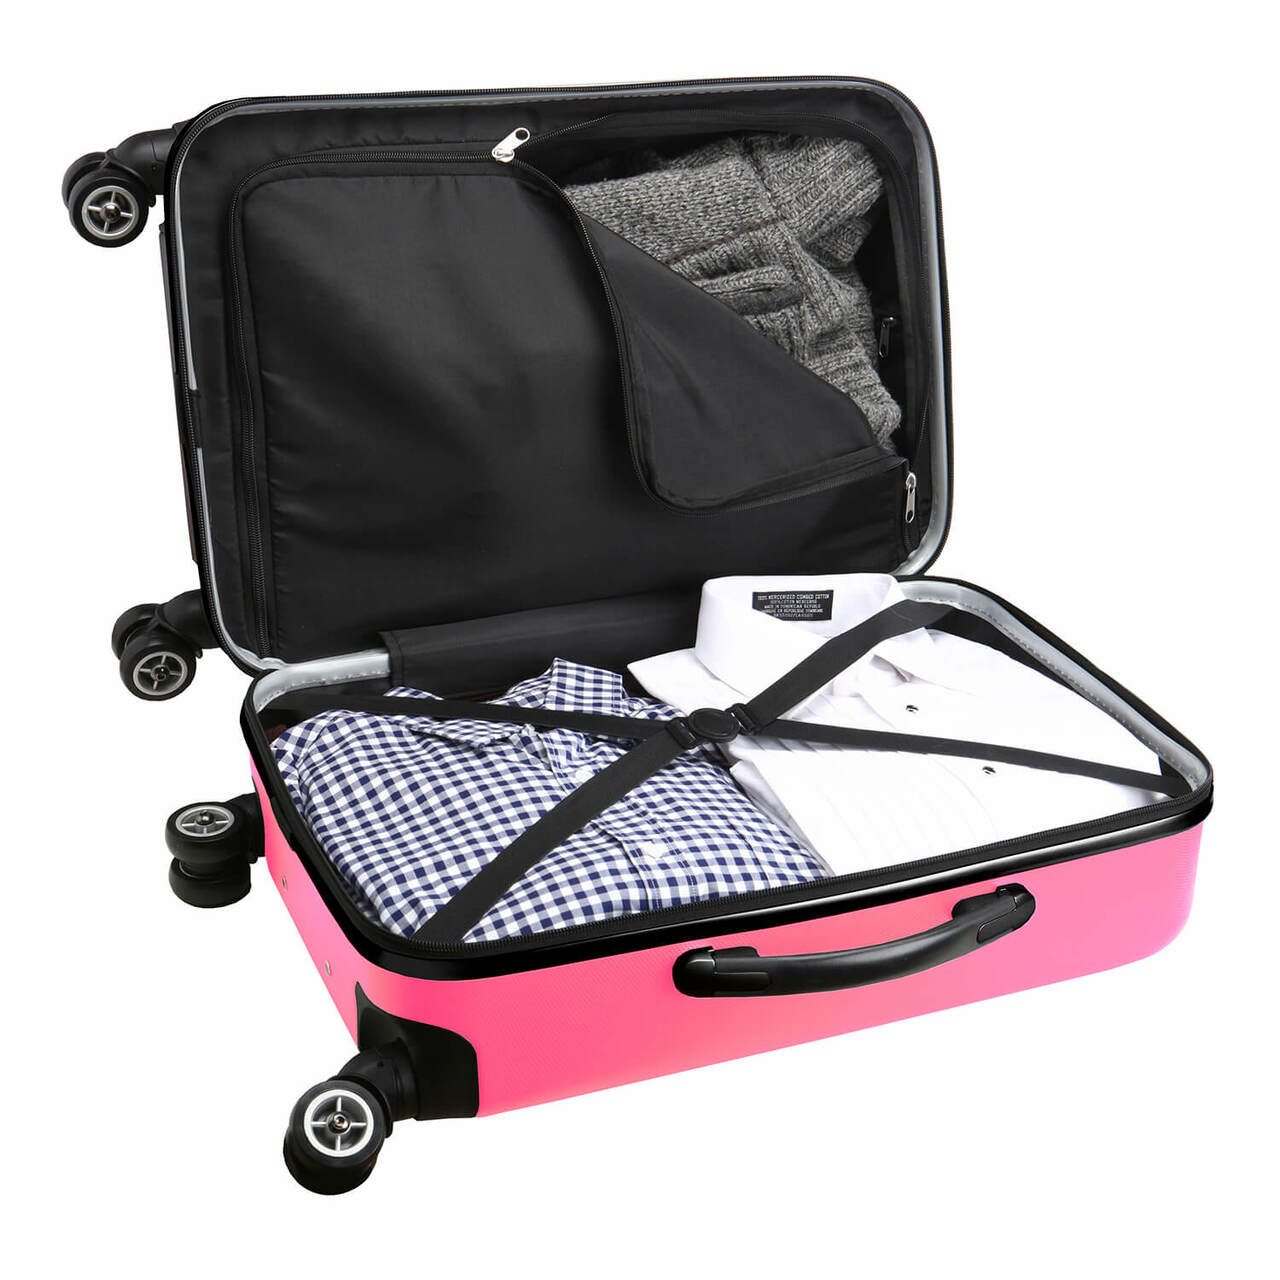 San Jose Sharks 20" Pink Domestic Carry-on Spinner